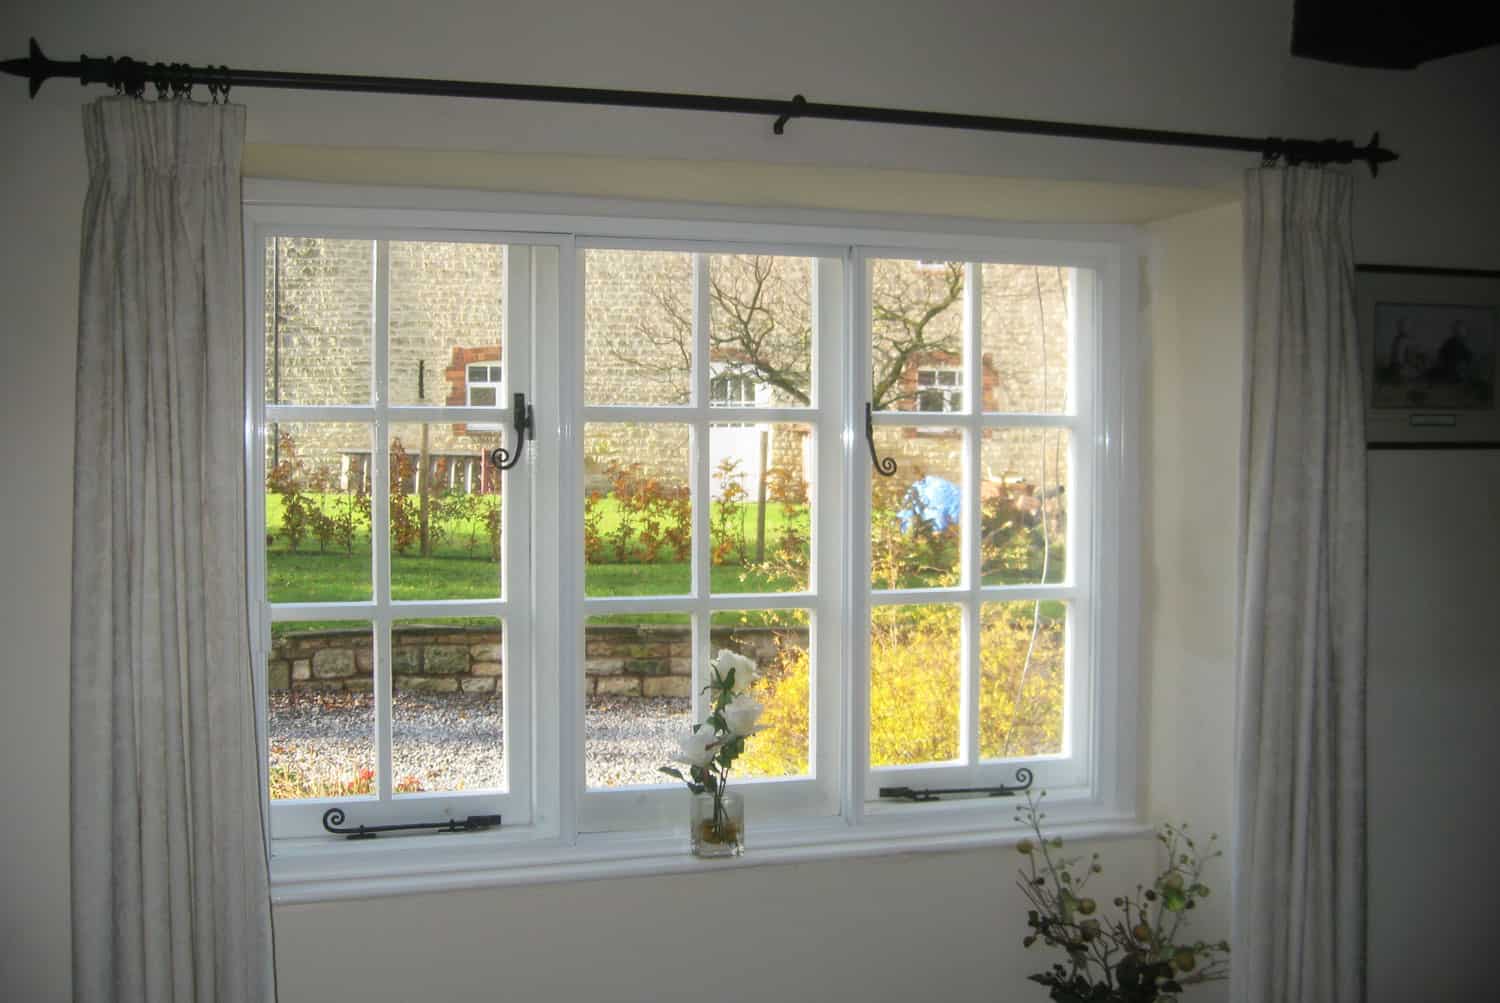 Facts about Secondary Glazing that may surprise you